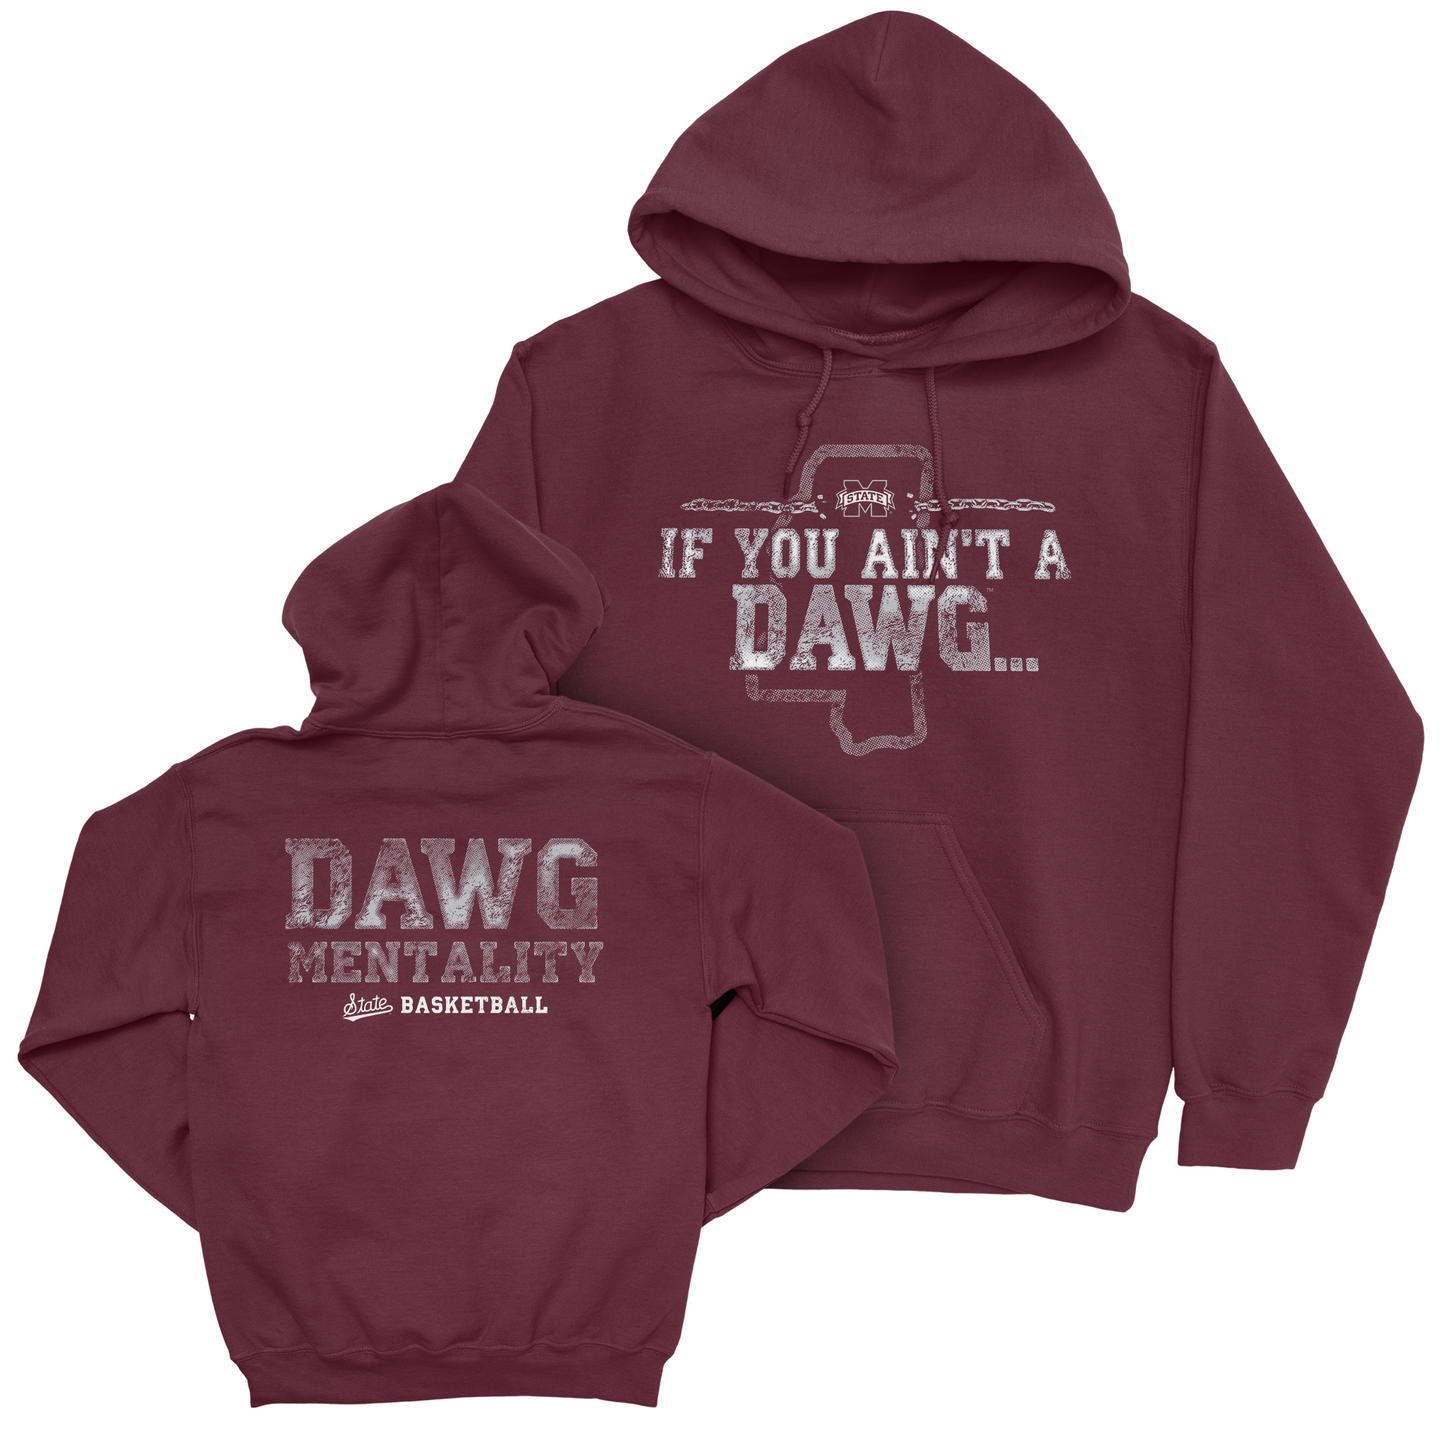 EXCLUSIVE RELEASE: The Dawg Mentality Collection Maroon Hoodie